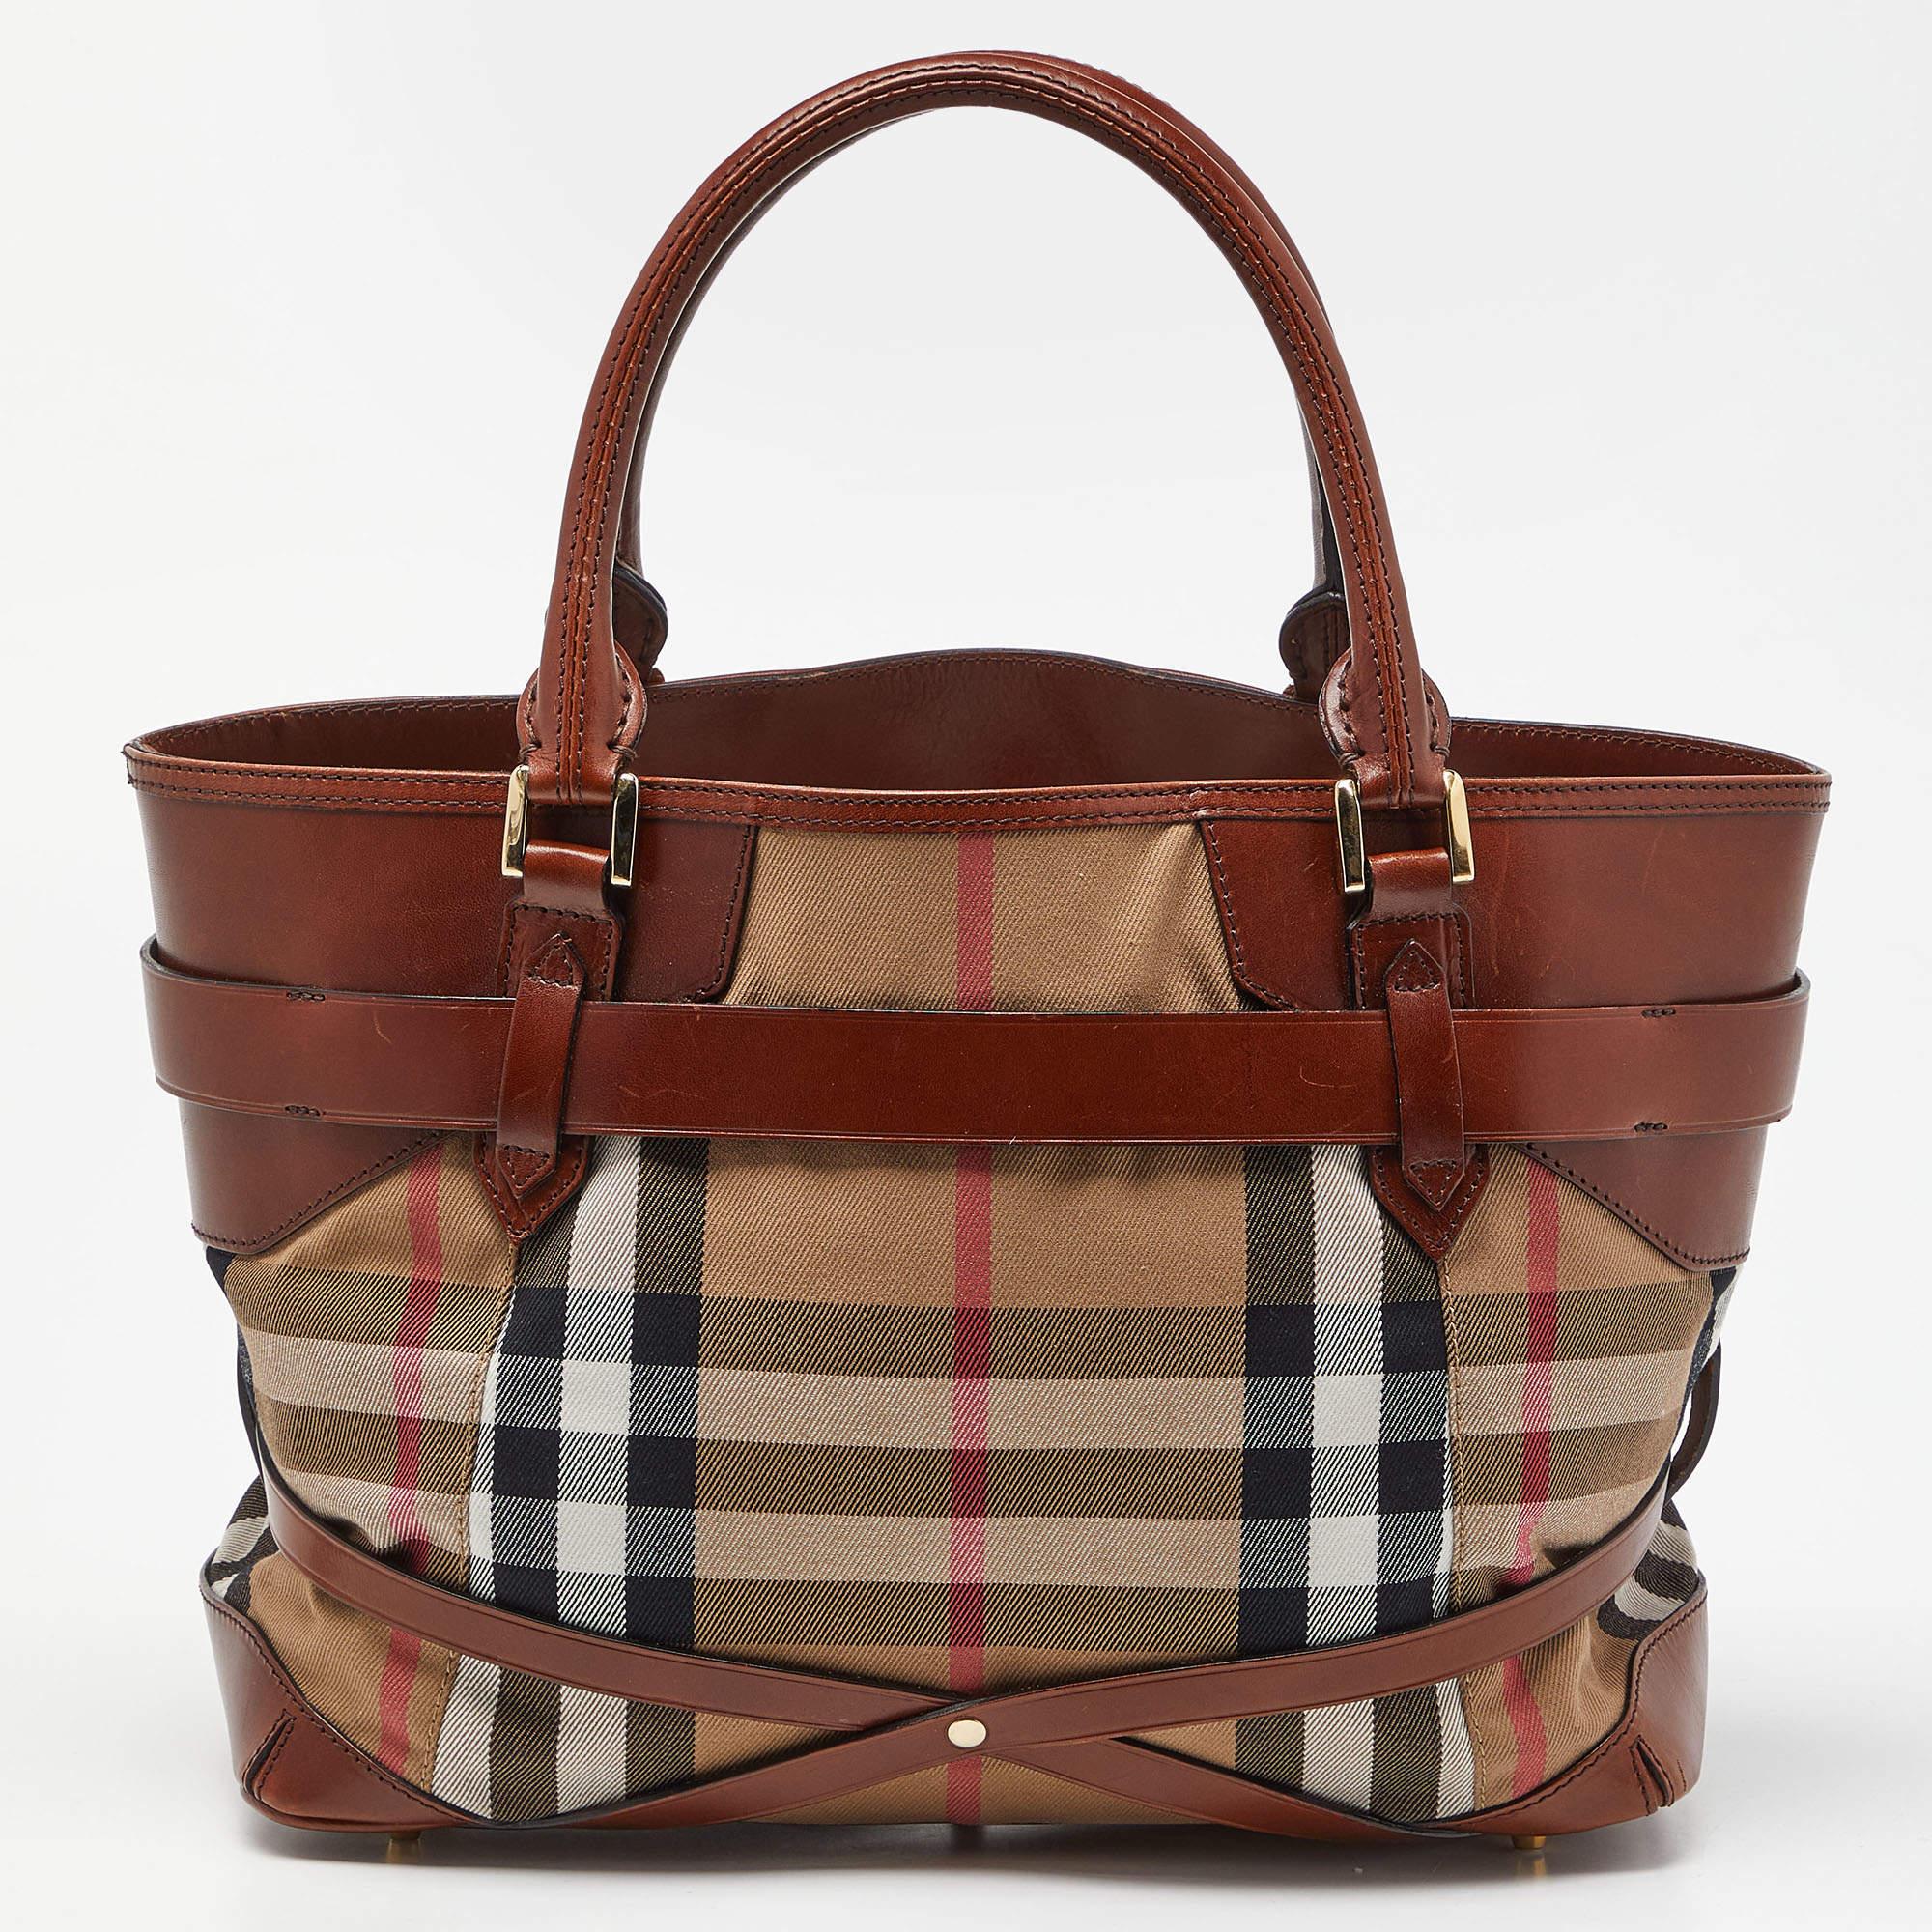 Walk out the door with the Burberry tote on your arm. Fashioned in House Check fabric & leather, the tote has two short handles and a spacious interior.

